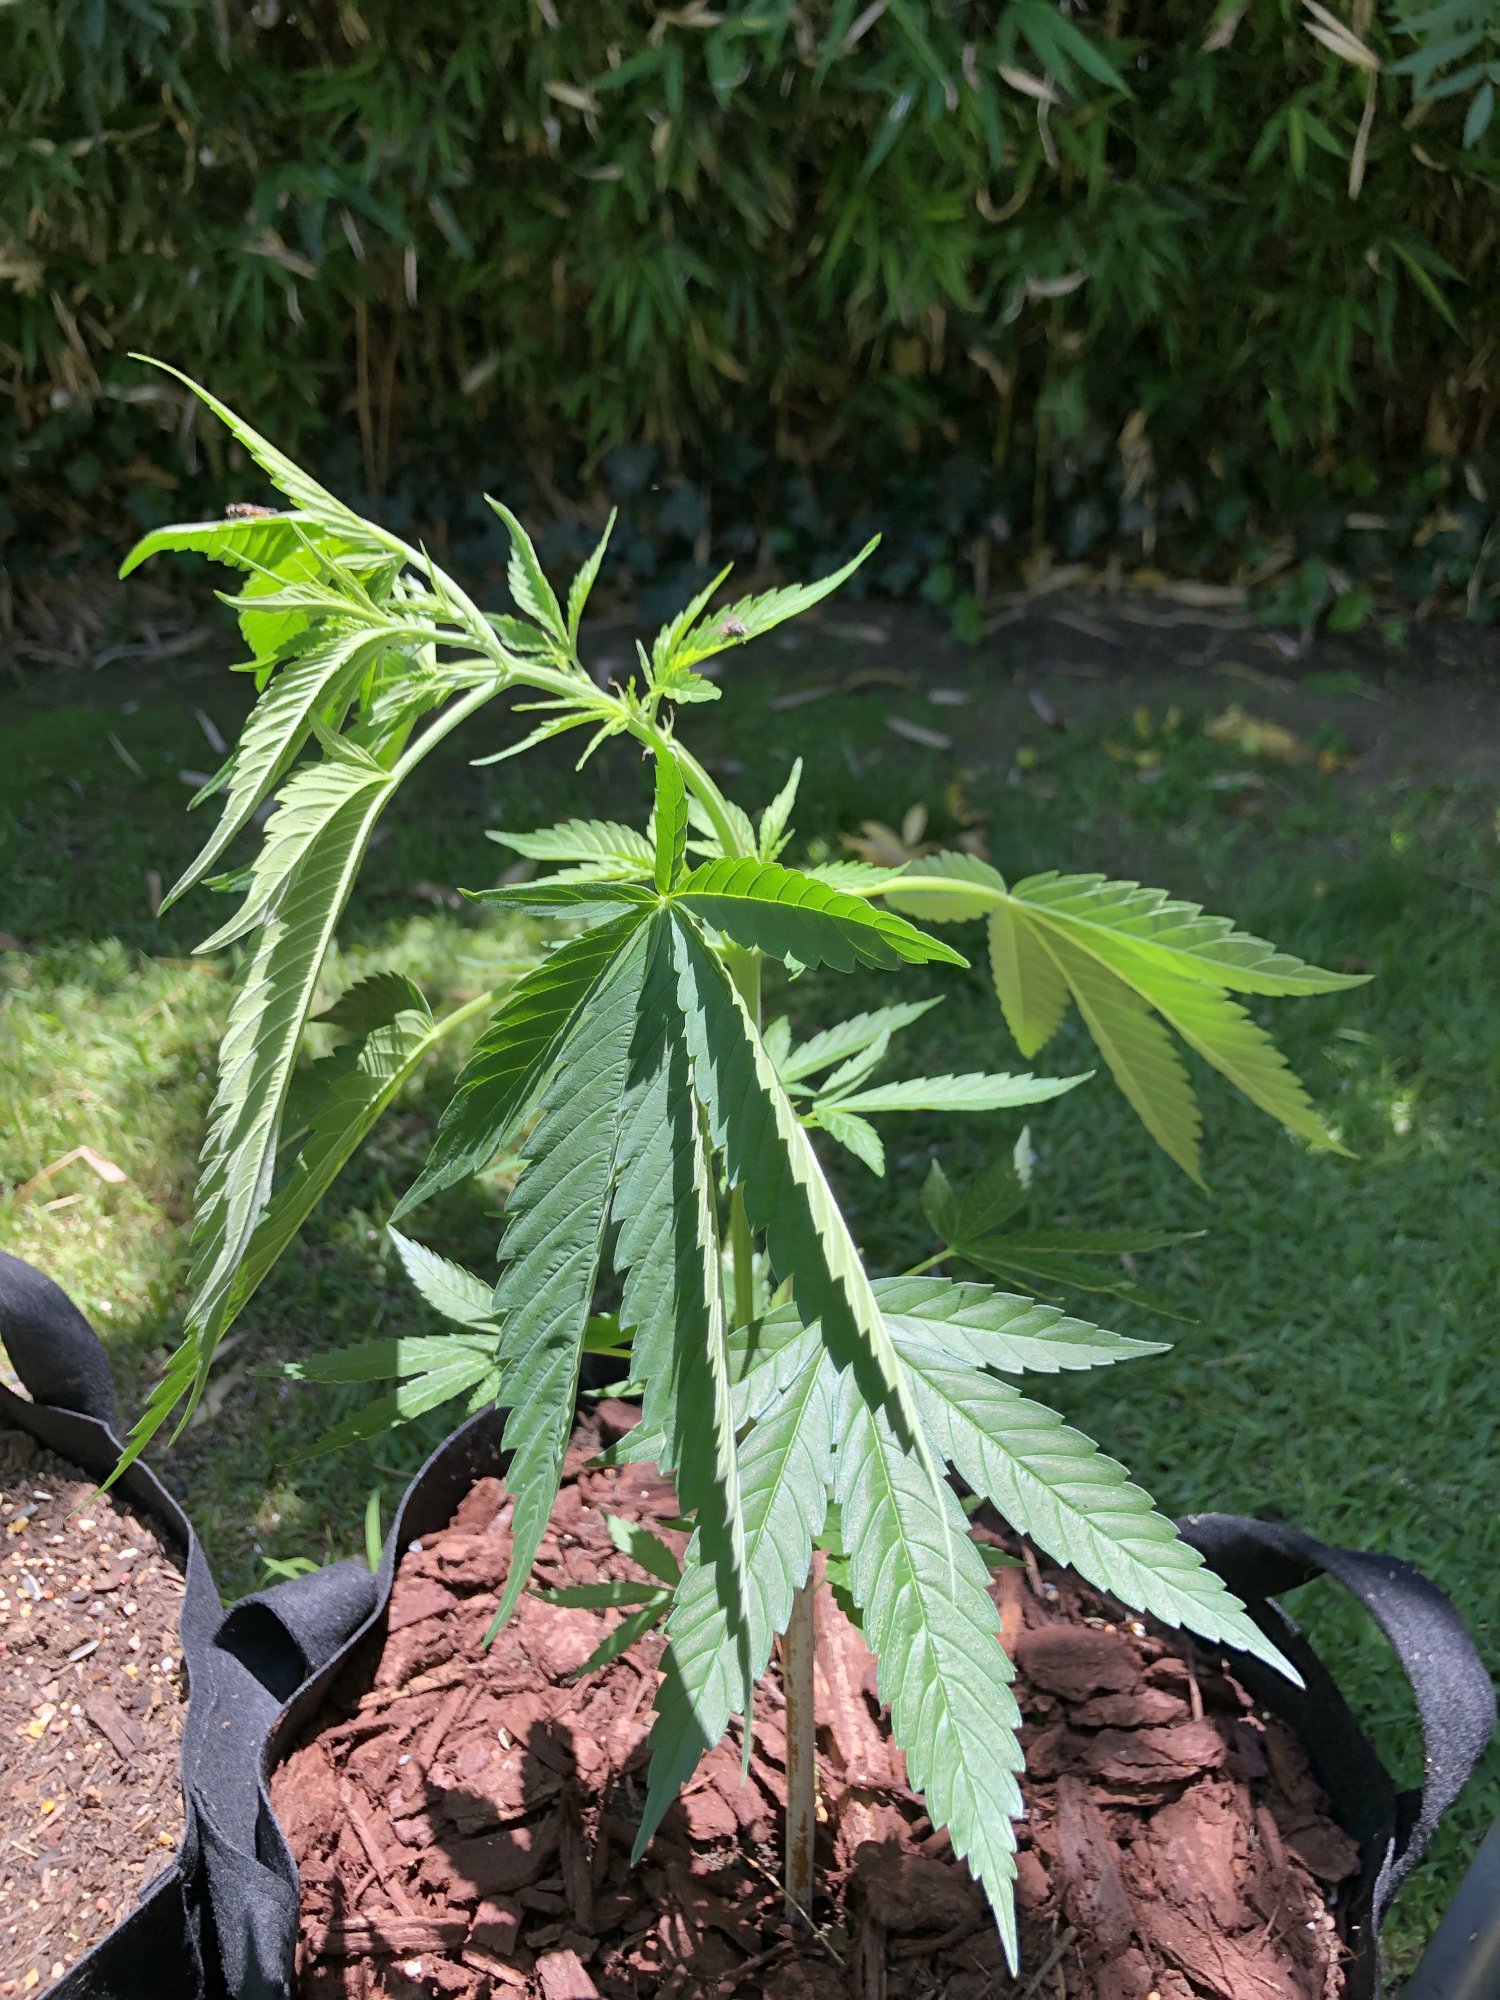 Top of plants wilting and drooping help